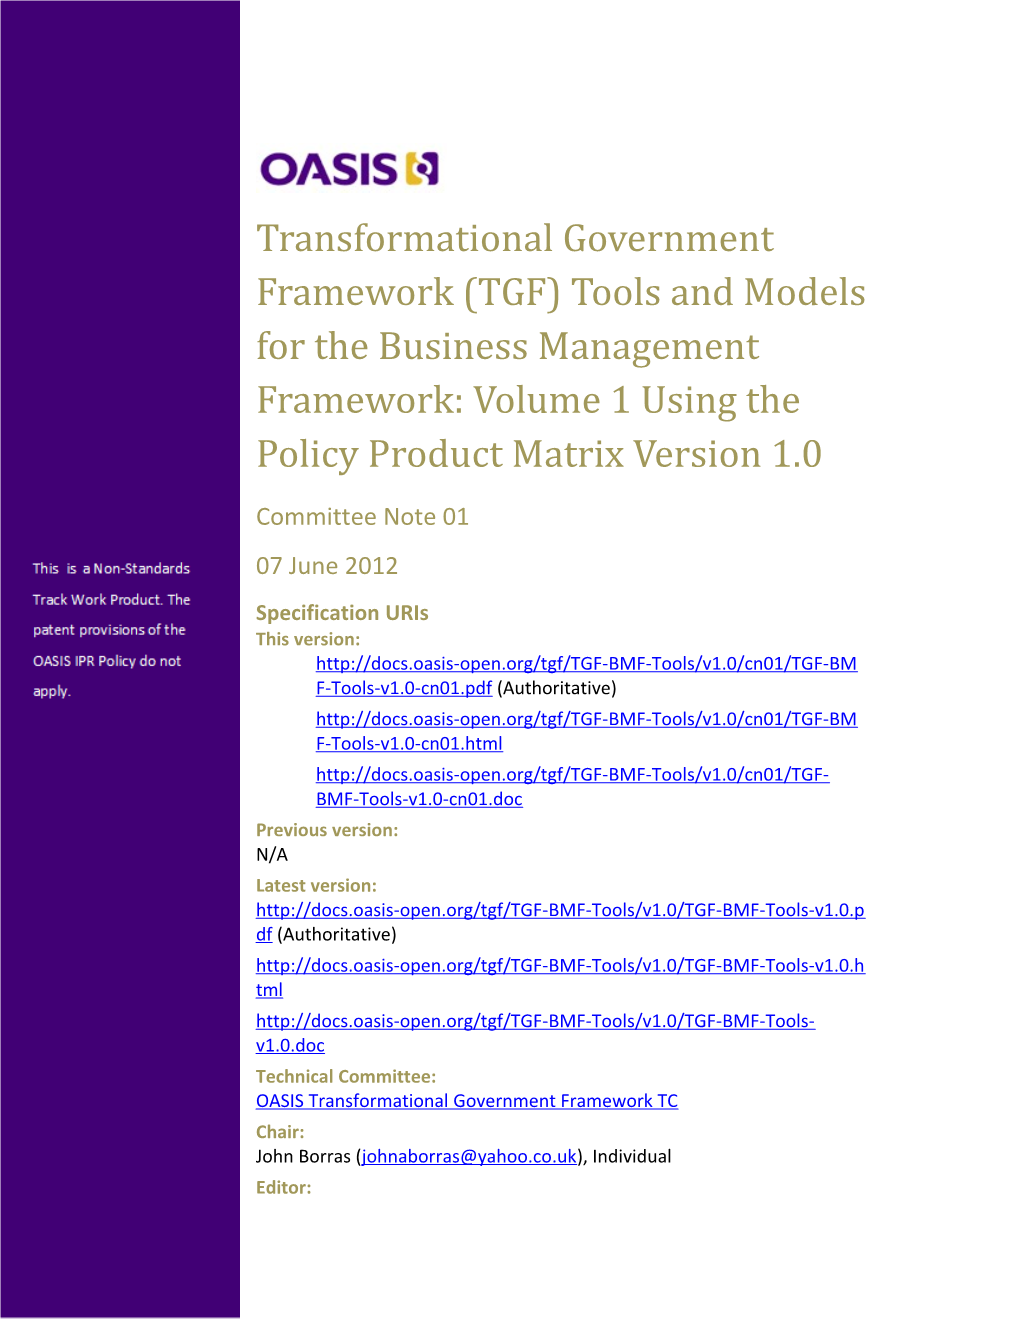 Transformational Government Framework (TGF) Tools and Models for the Business Management